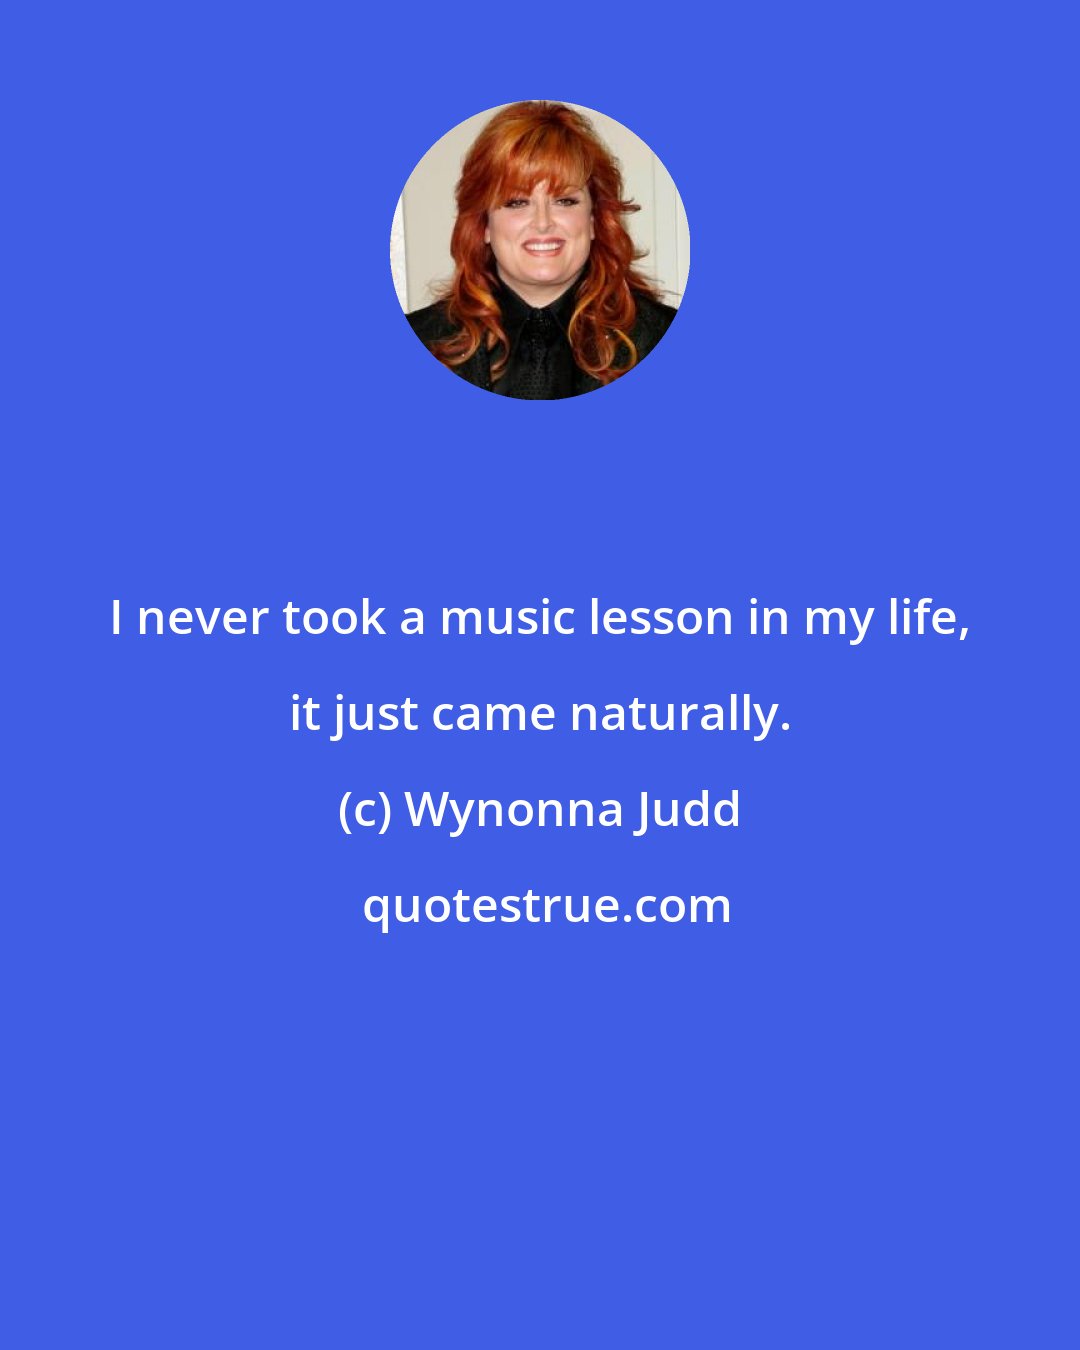 Wynonna Judd: I never took a music lesson in my life, it just came naturally.